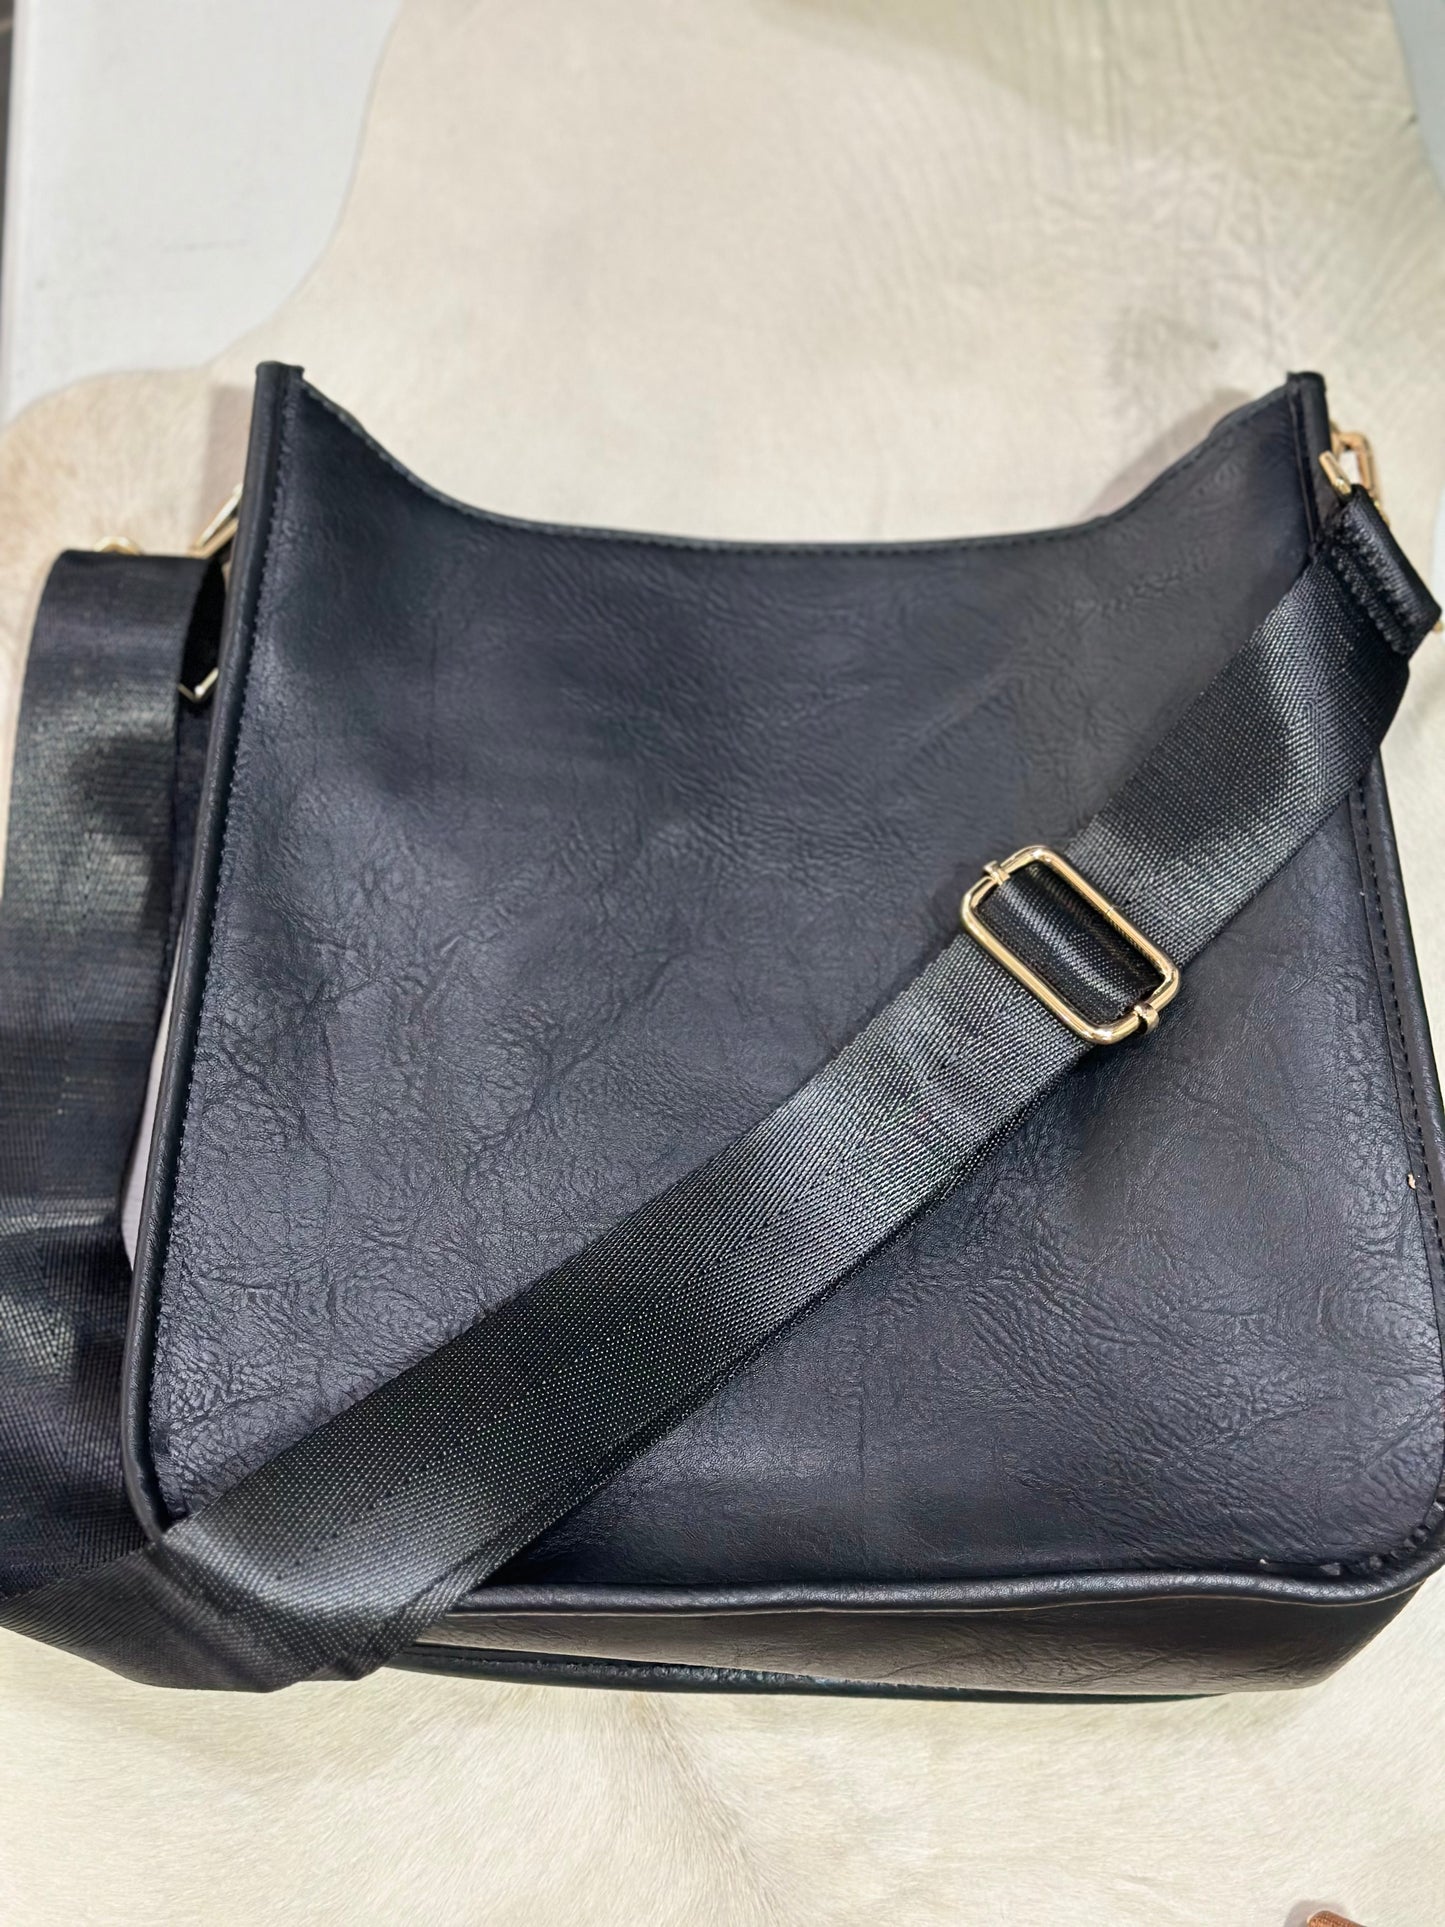 Take Everyday Leather Purse